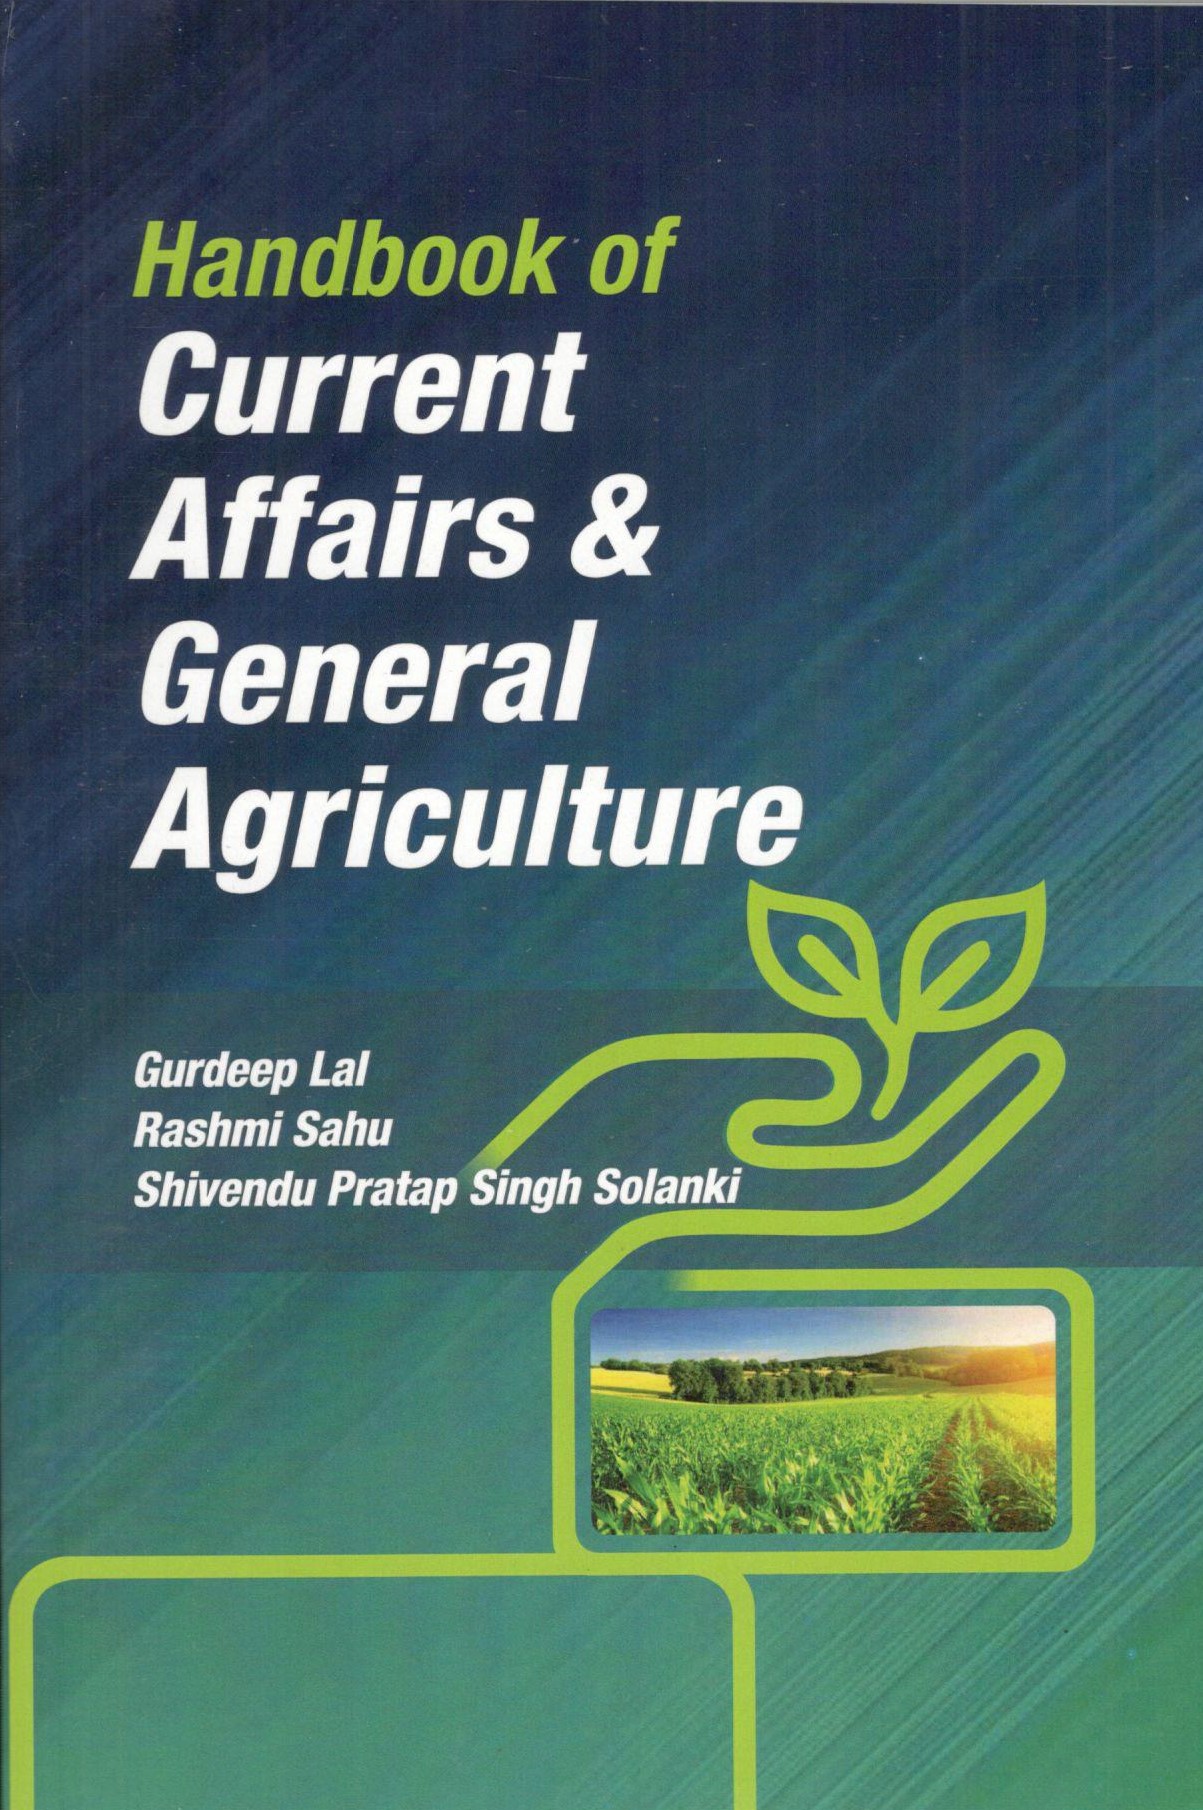 Handbook of Current Affairs & General Agriculture